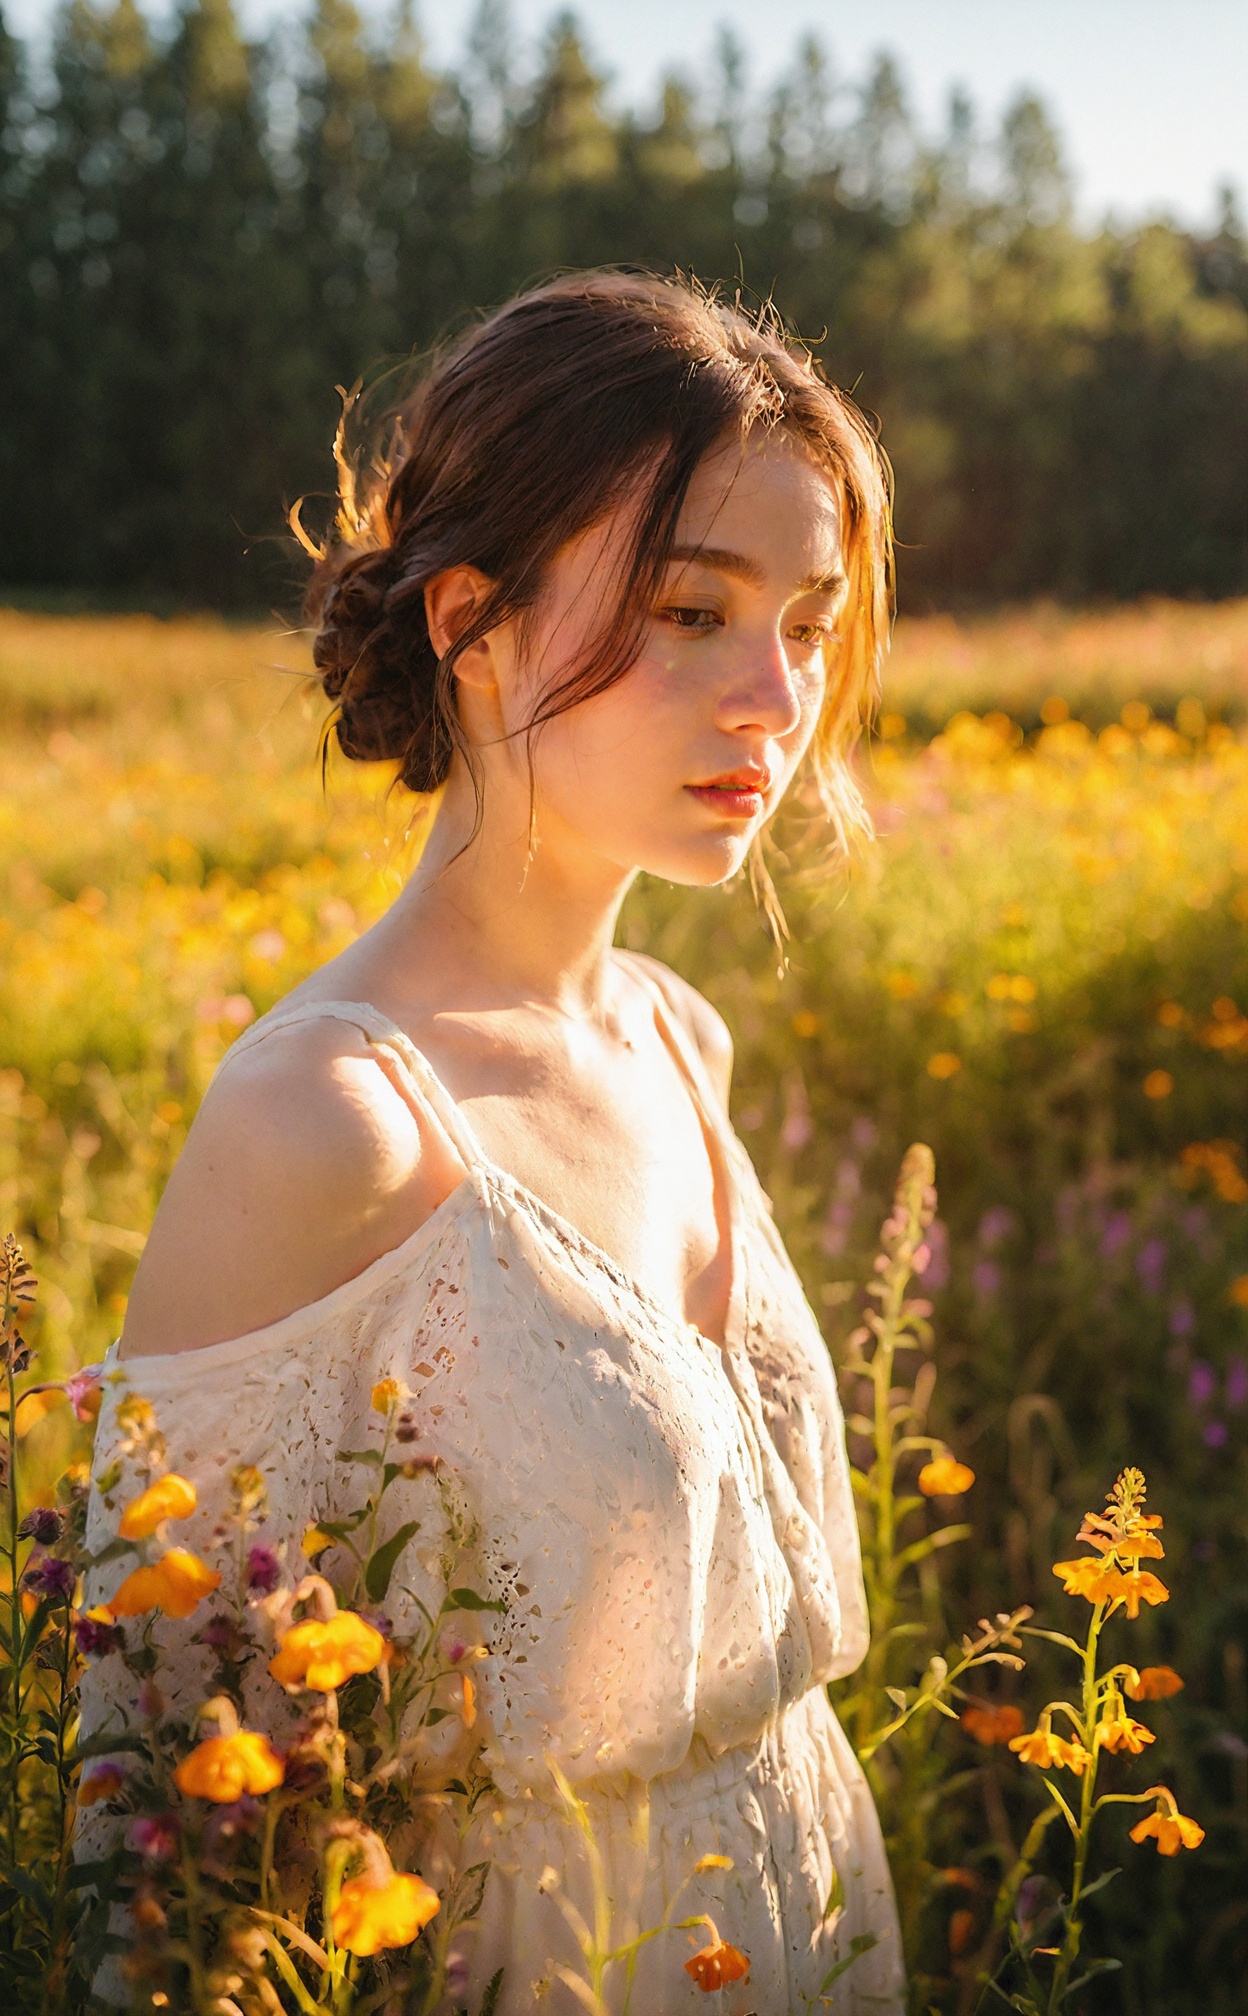 mugglelight, a young woman bathed in the warm glow of golden hour, standing in a field of wildflowers, soft shadows, radiant sunlight, contemplative expression, floral surroundings.